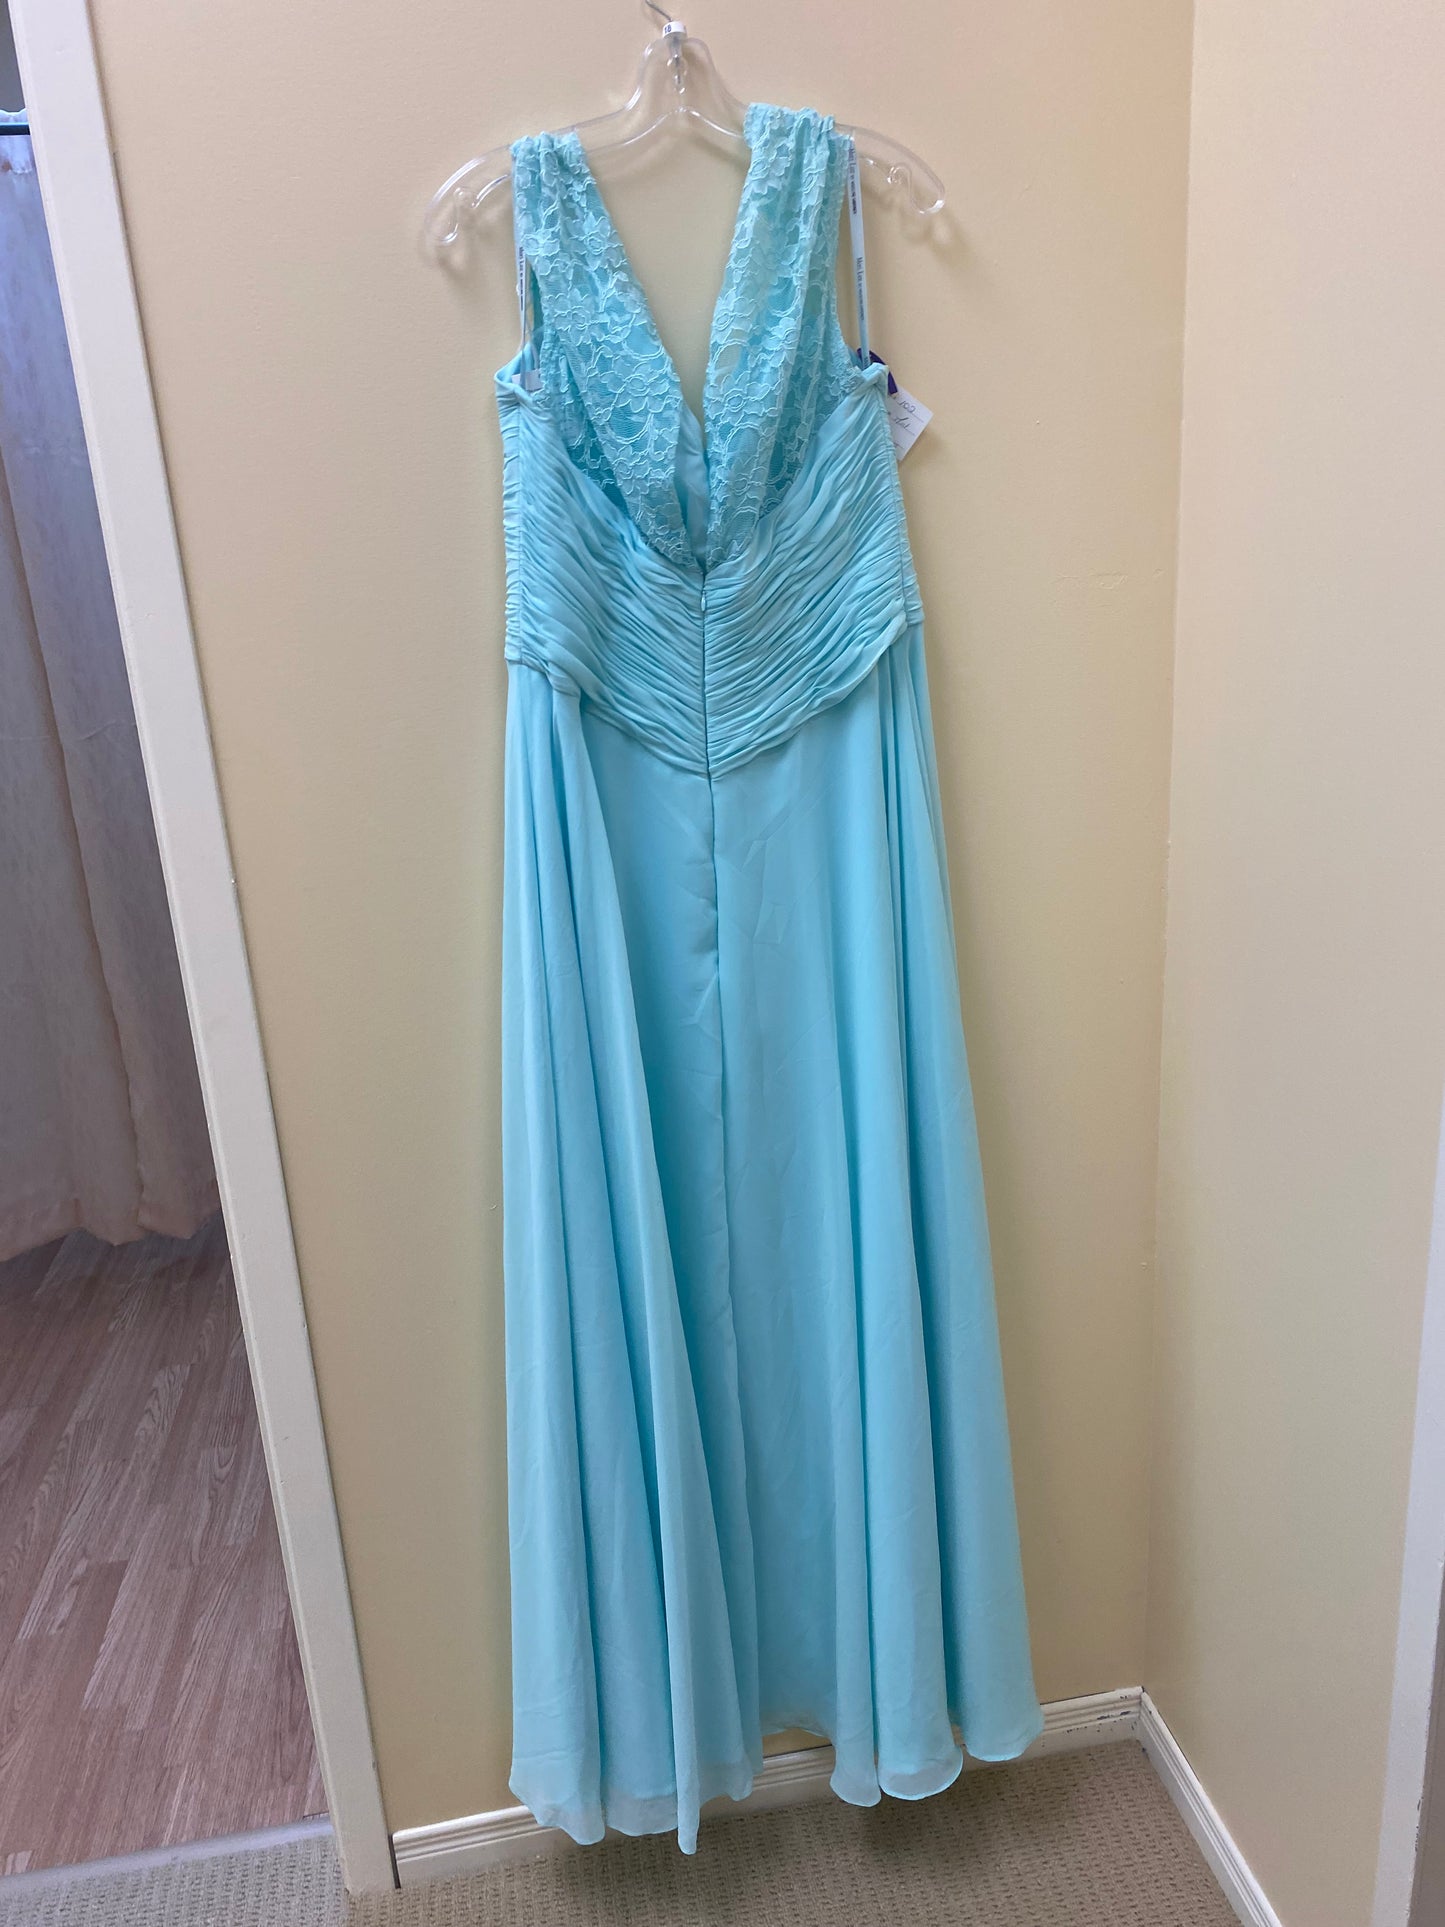 MORI LEE - 102 - Mint Size 18 Long Prom / Mother of the Bride / Bridesmaid Dress